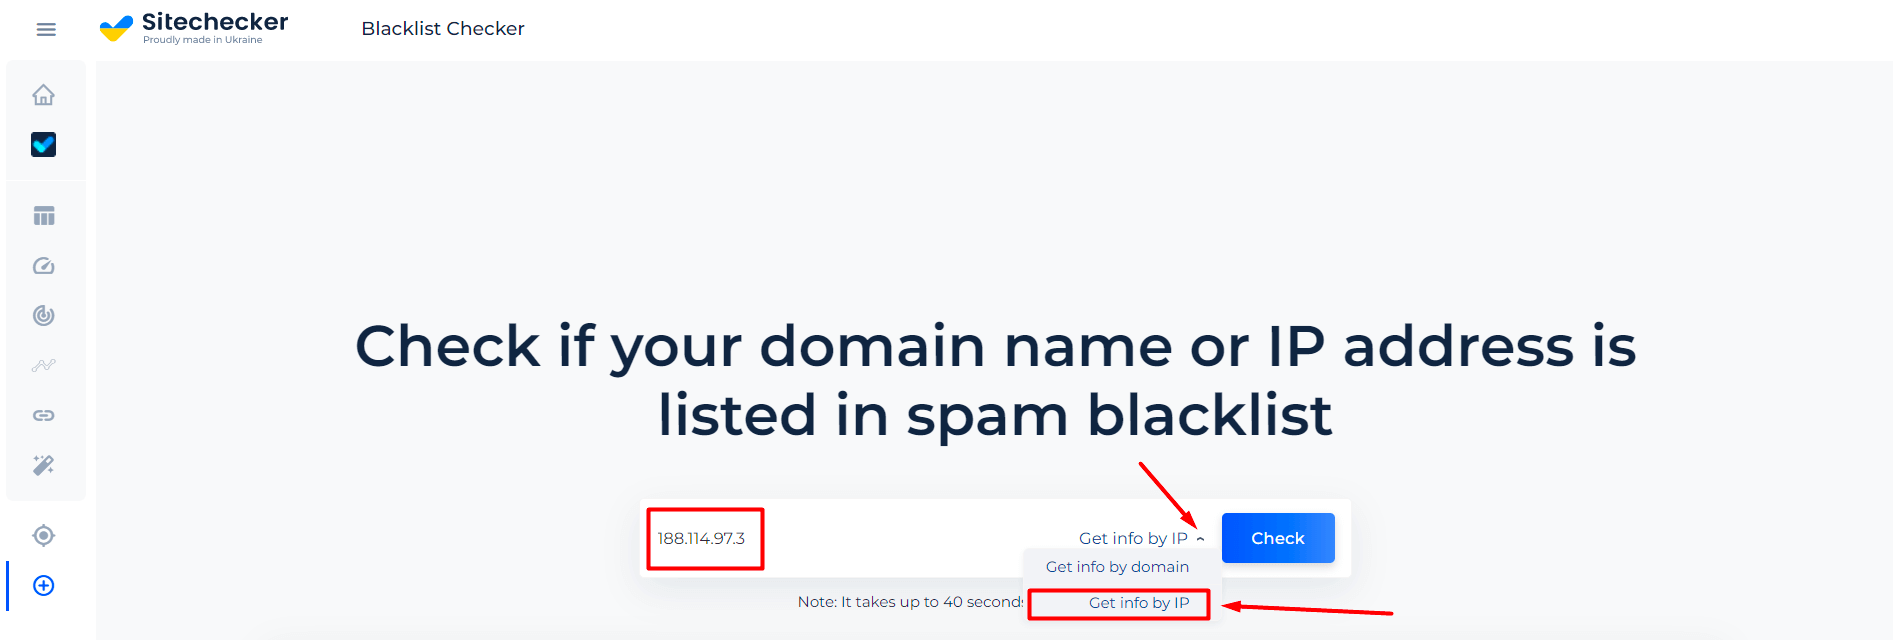 Check Your Domain or IP